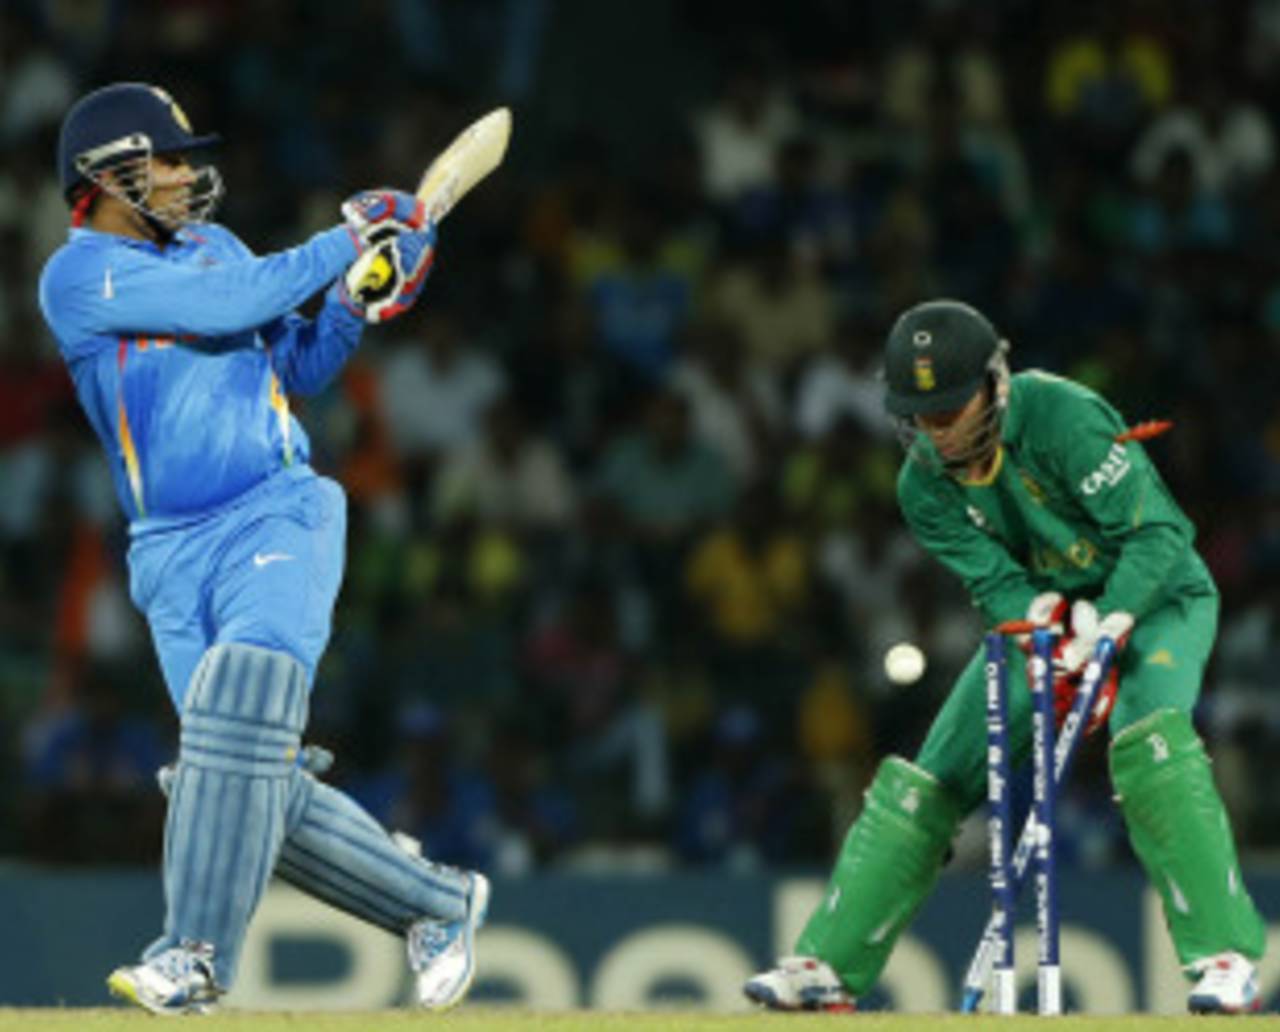 Virender Sehwag's ordinary tournament in Colombo ended with an injury&nbsp;&nbsp;&bull;&nbsp;&nbsp;Associated Press